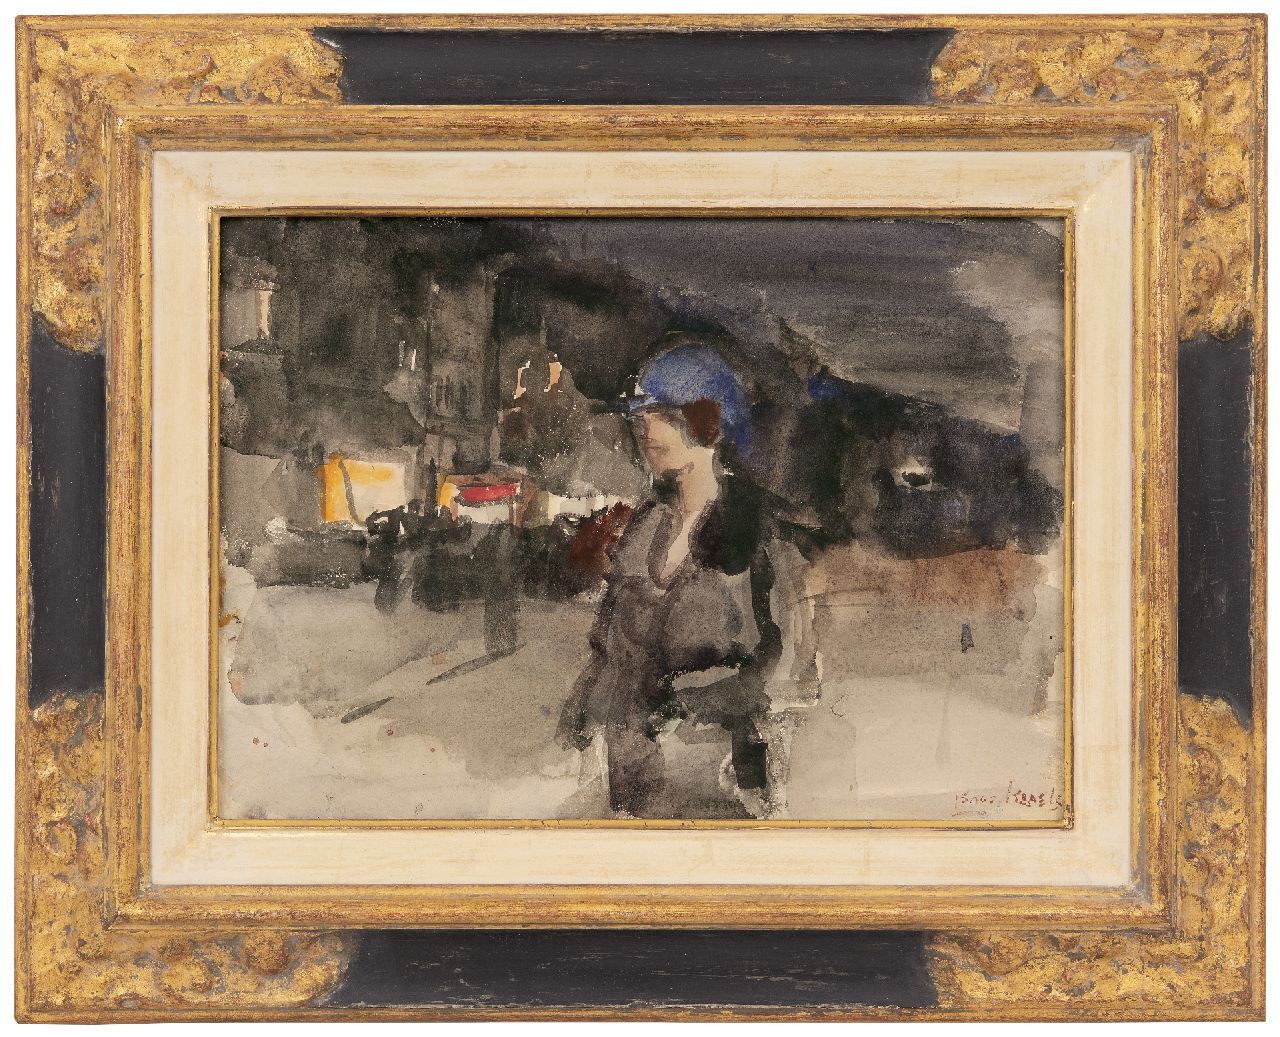 Israels I.L.  | 'Isaac' Lazarus Israels, Woman with a blue hat in Amsterdam shopping district, by night, watercolour on paper 25.5 x 35.4 cm, signed l.r.